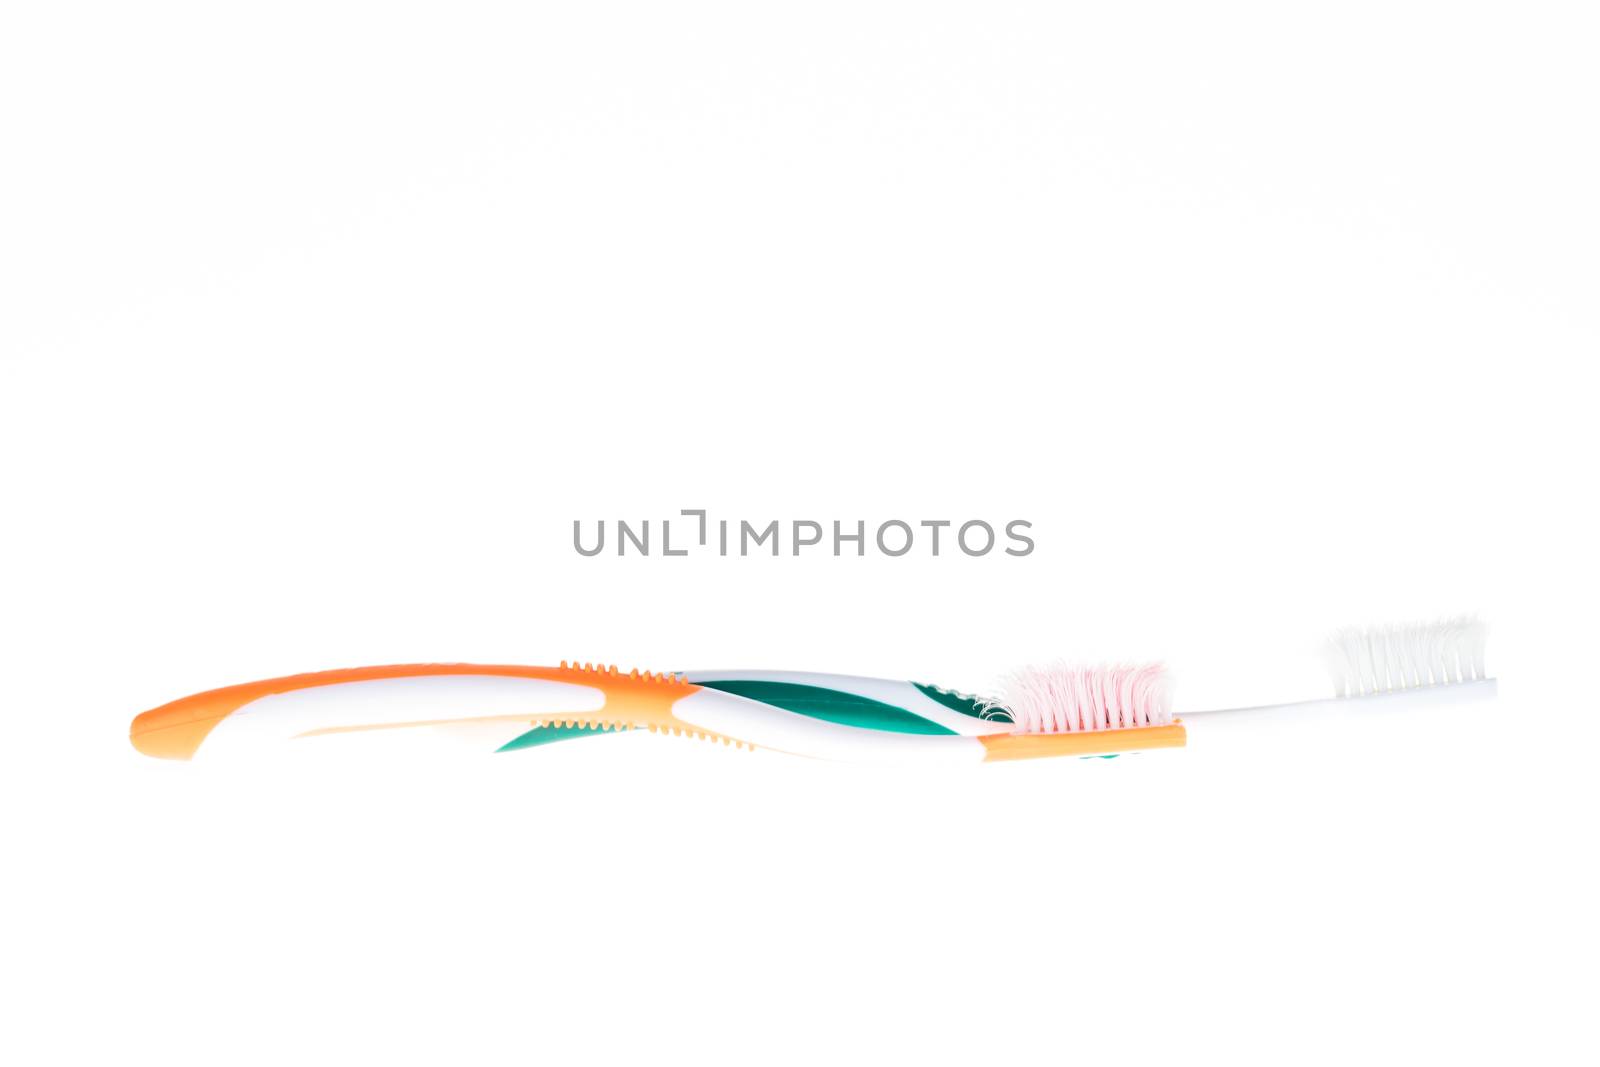 Two Color worn toothbrush on white background